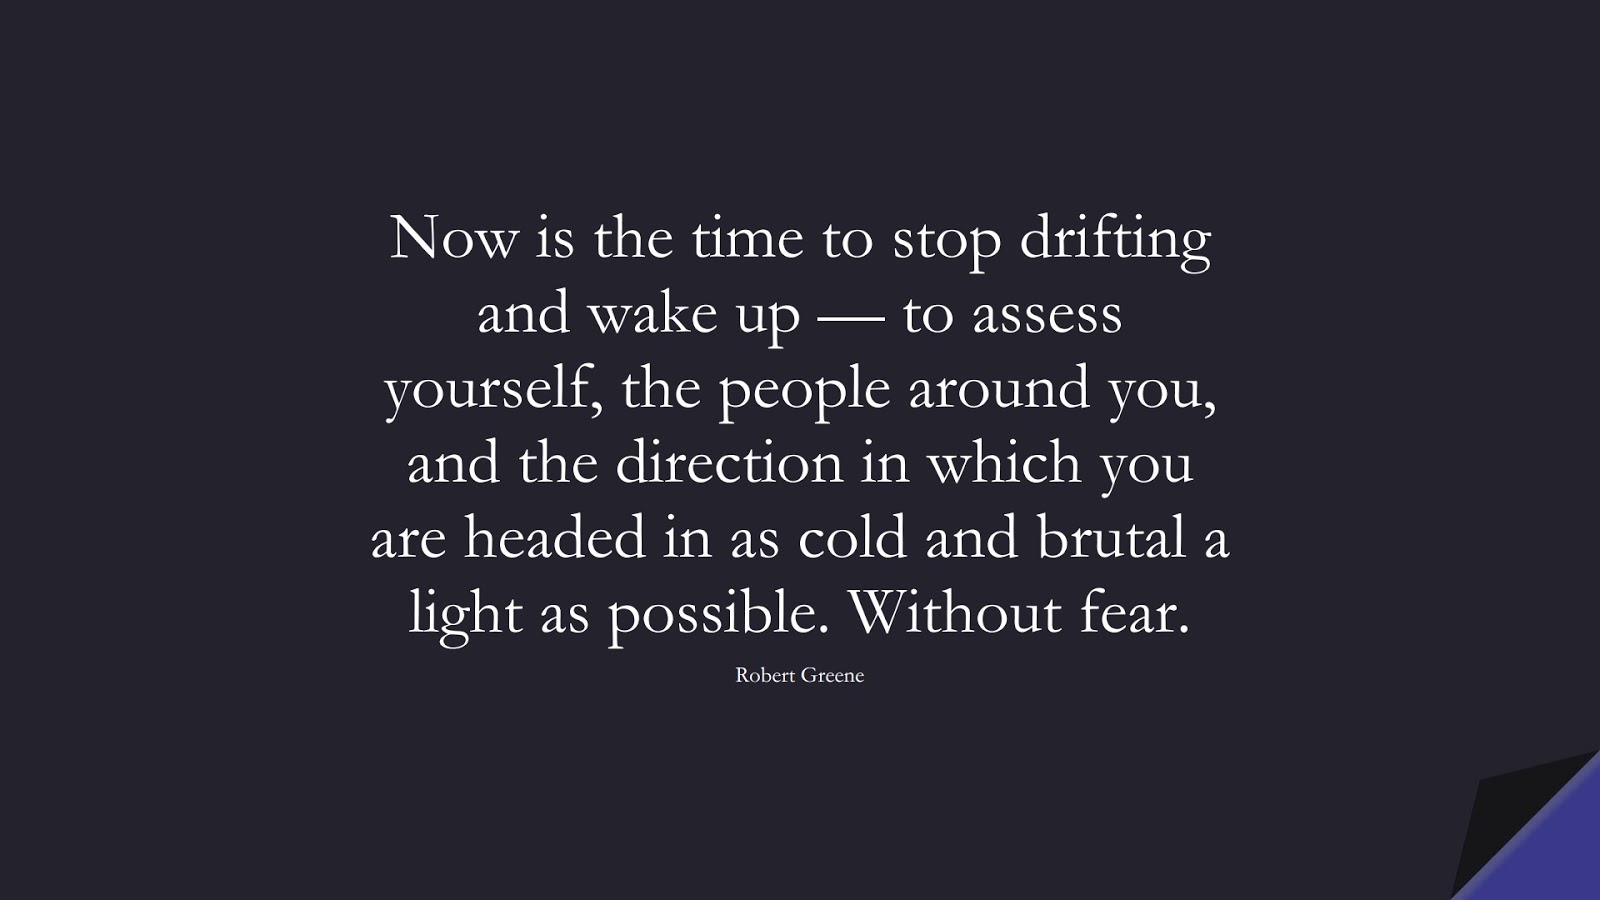 Now is the time to stop drifting and wake up — to assess yourself, the people around you, and the direction in which you are headed in as cold and brutal a light as possible. Without fear. (Robert Greene);  #FearQuotes